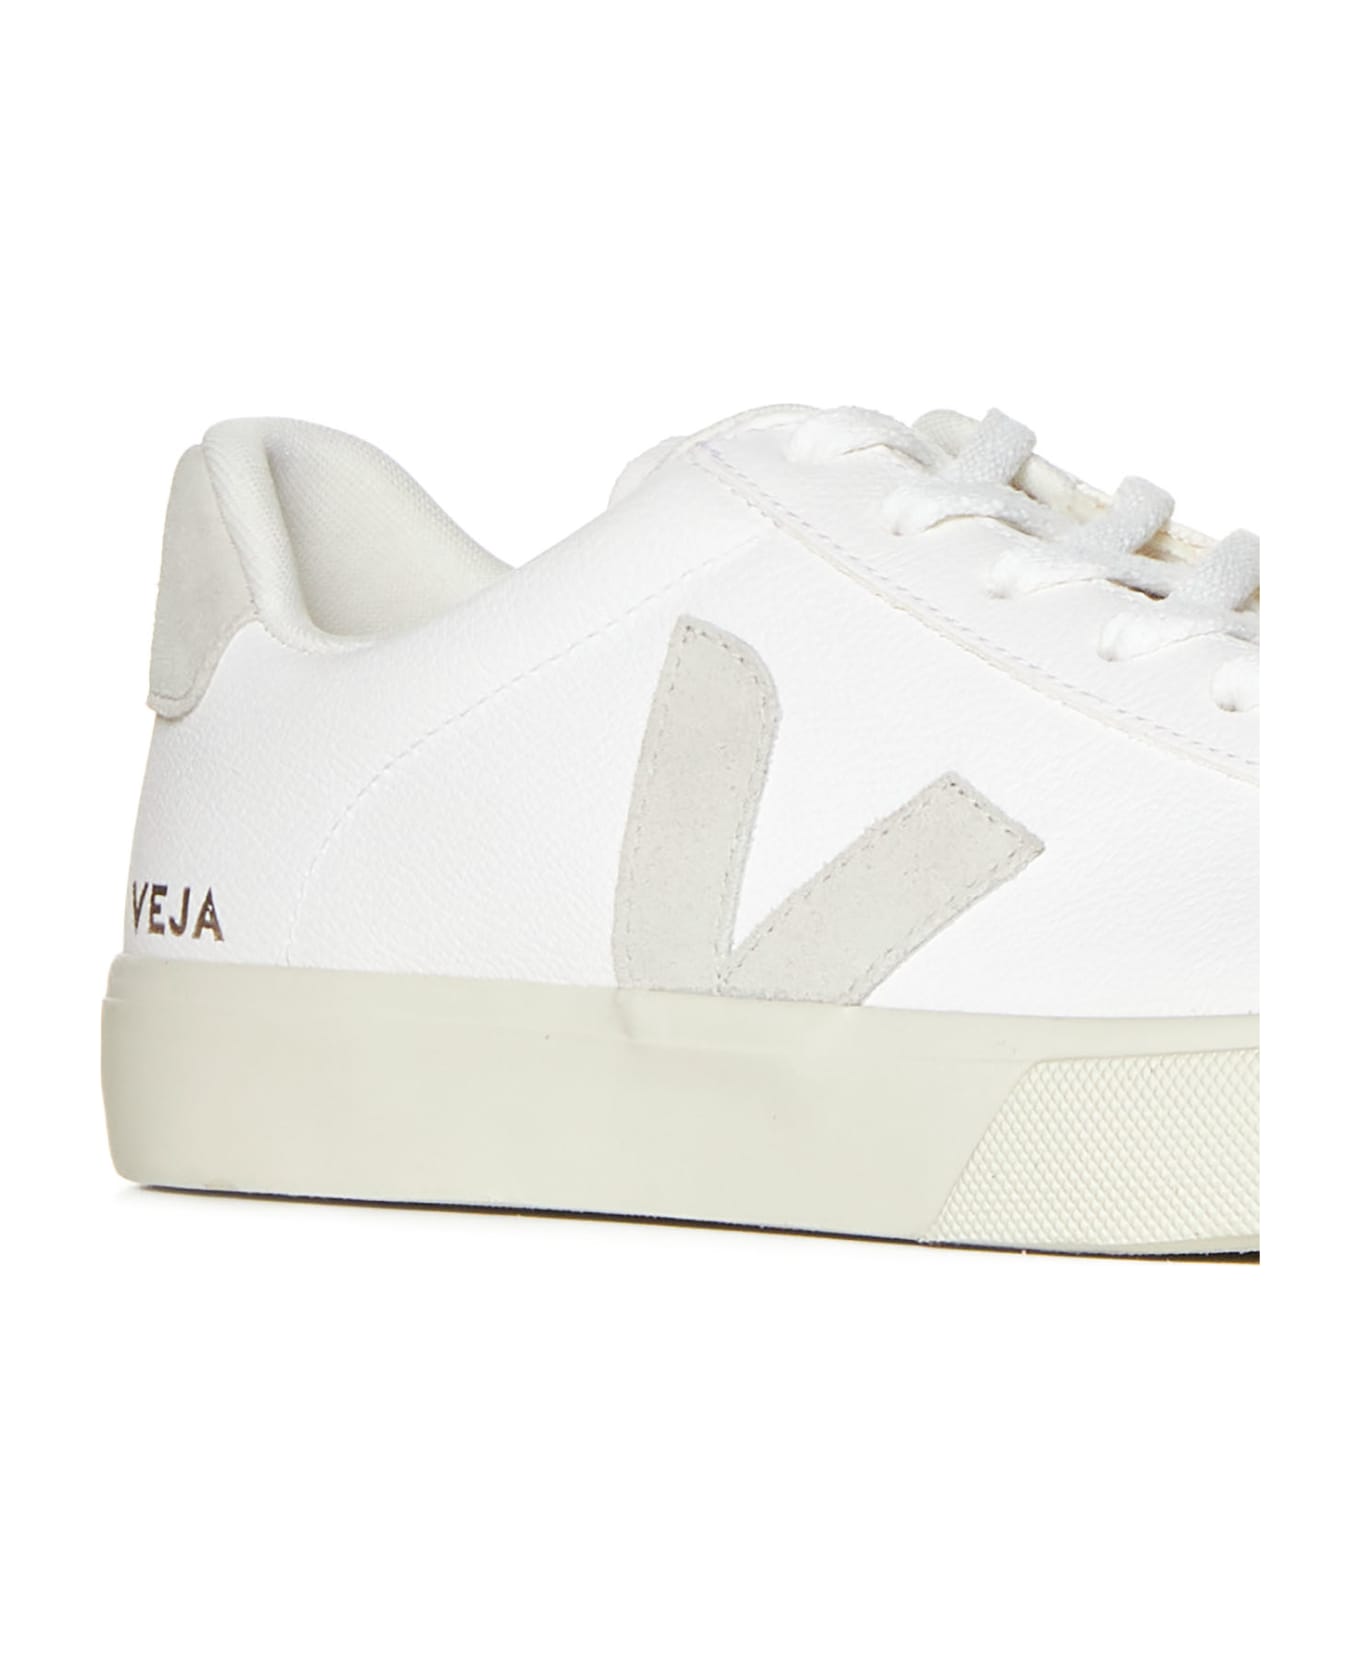 Veja Sneakers - EXTRA-WHITE_NATURAL-SUEDE スニーカー